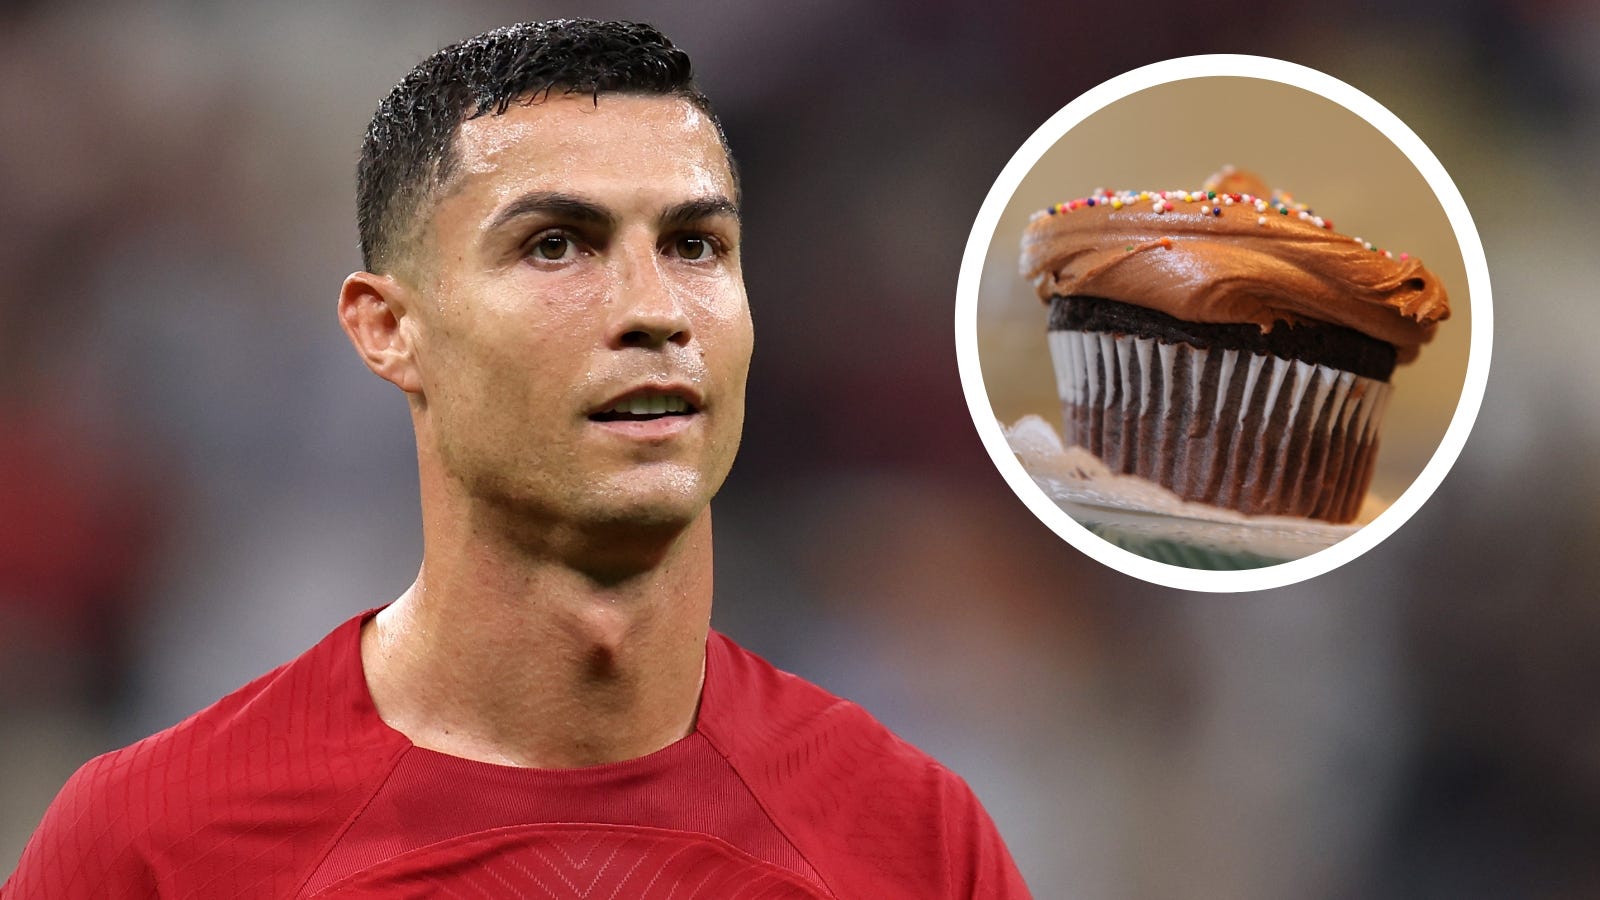 Cristiano Ronaldo Birthday Cake Ideas Images (Pictures) in 2023 | Soccer  birthday cakes, Soccer cake, Creative cake decorating